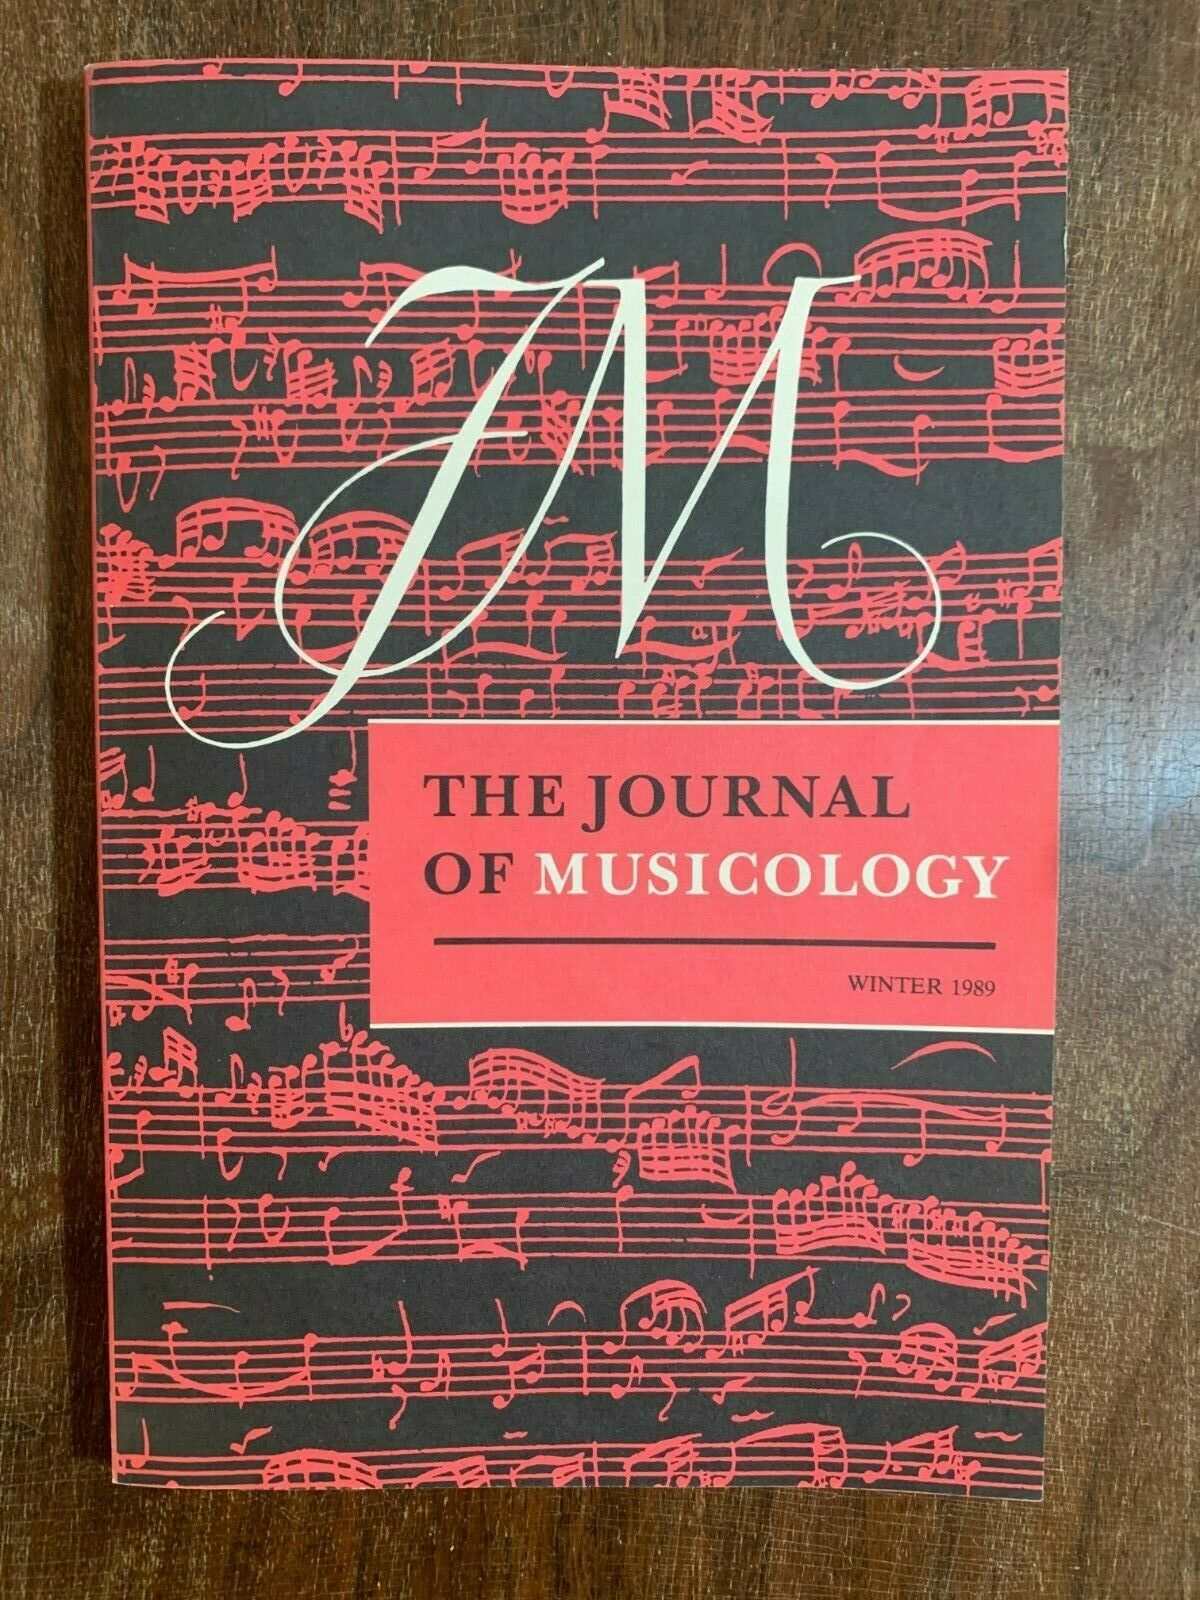 The Journal of Musicology, Review of Music, Winter 1989, Vol. VII, Number 1 (K7)